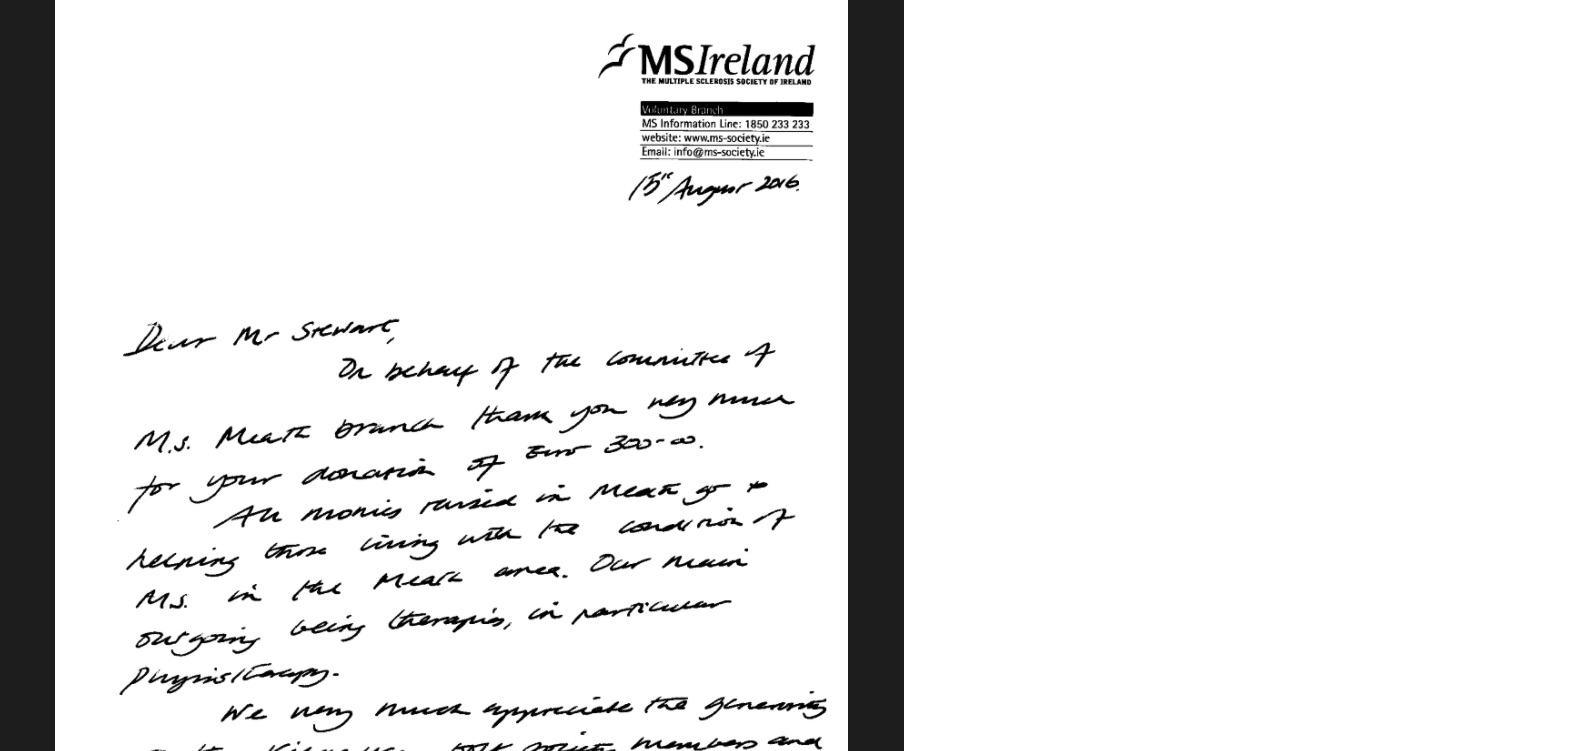 Letter of thanks from MS Ireland.